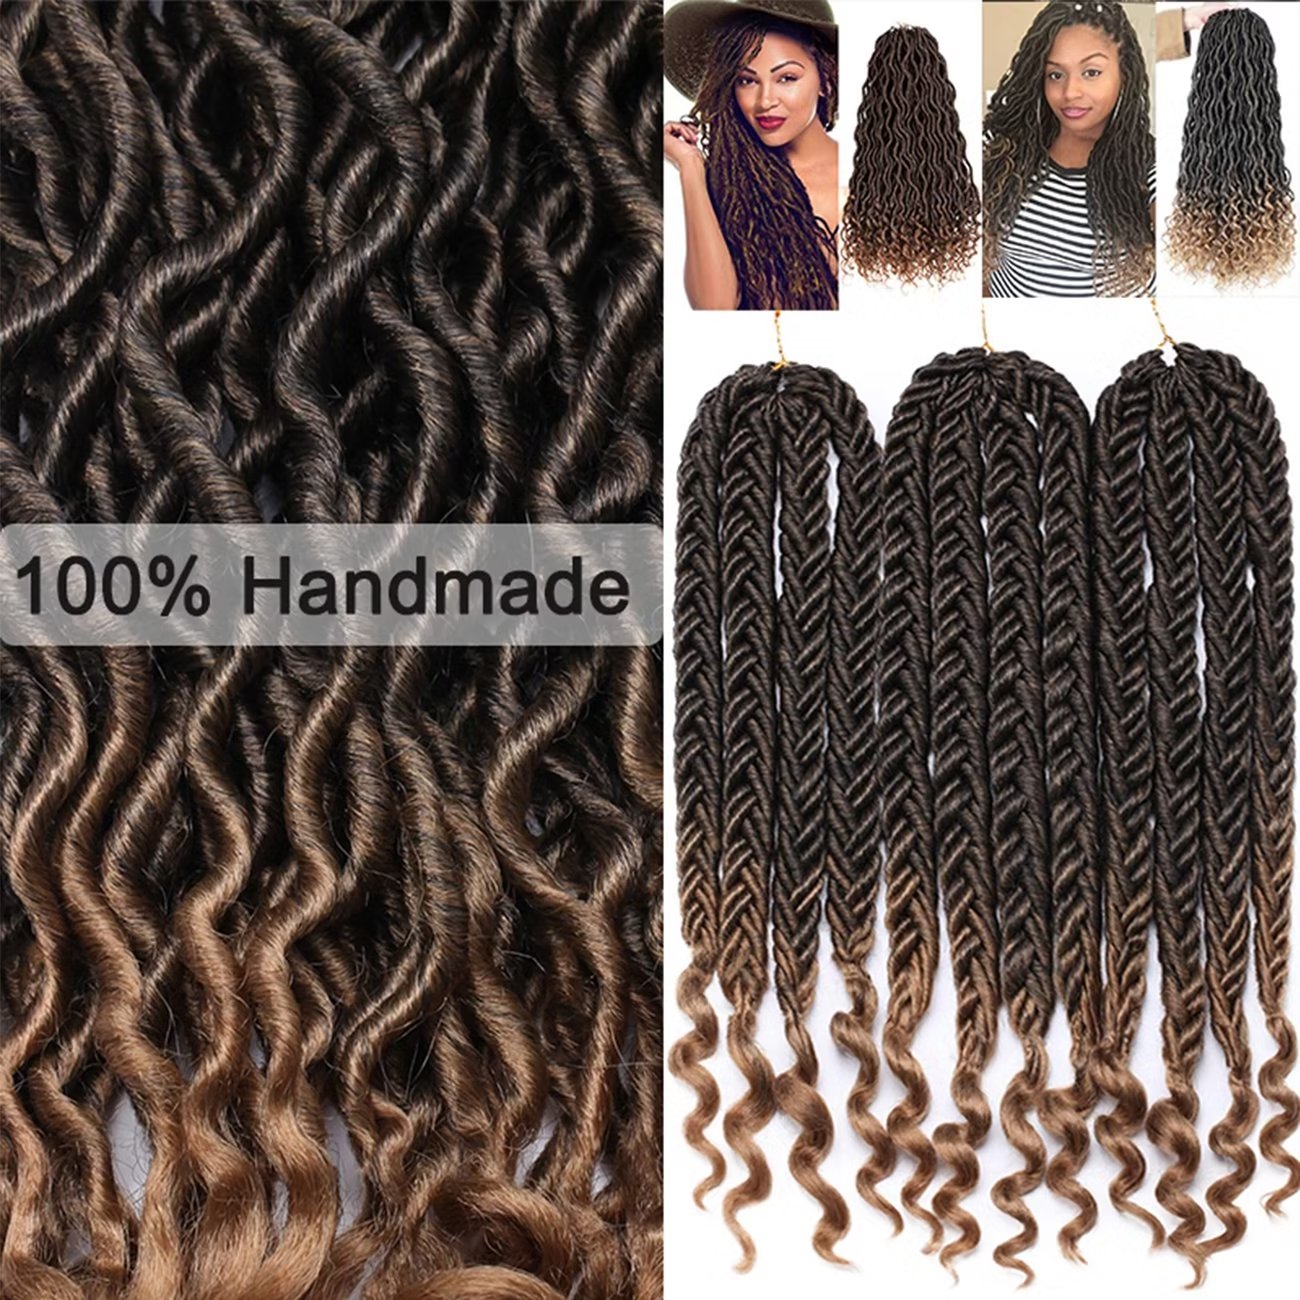 SEGO Faux Locs Crochet Braids Hair Synthetic Braiding Hair Real Soft Wave Curly Black Hair Extensions Ombre Dreadlocks Hairstyles - image 5 of 10